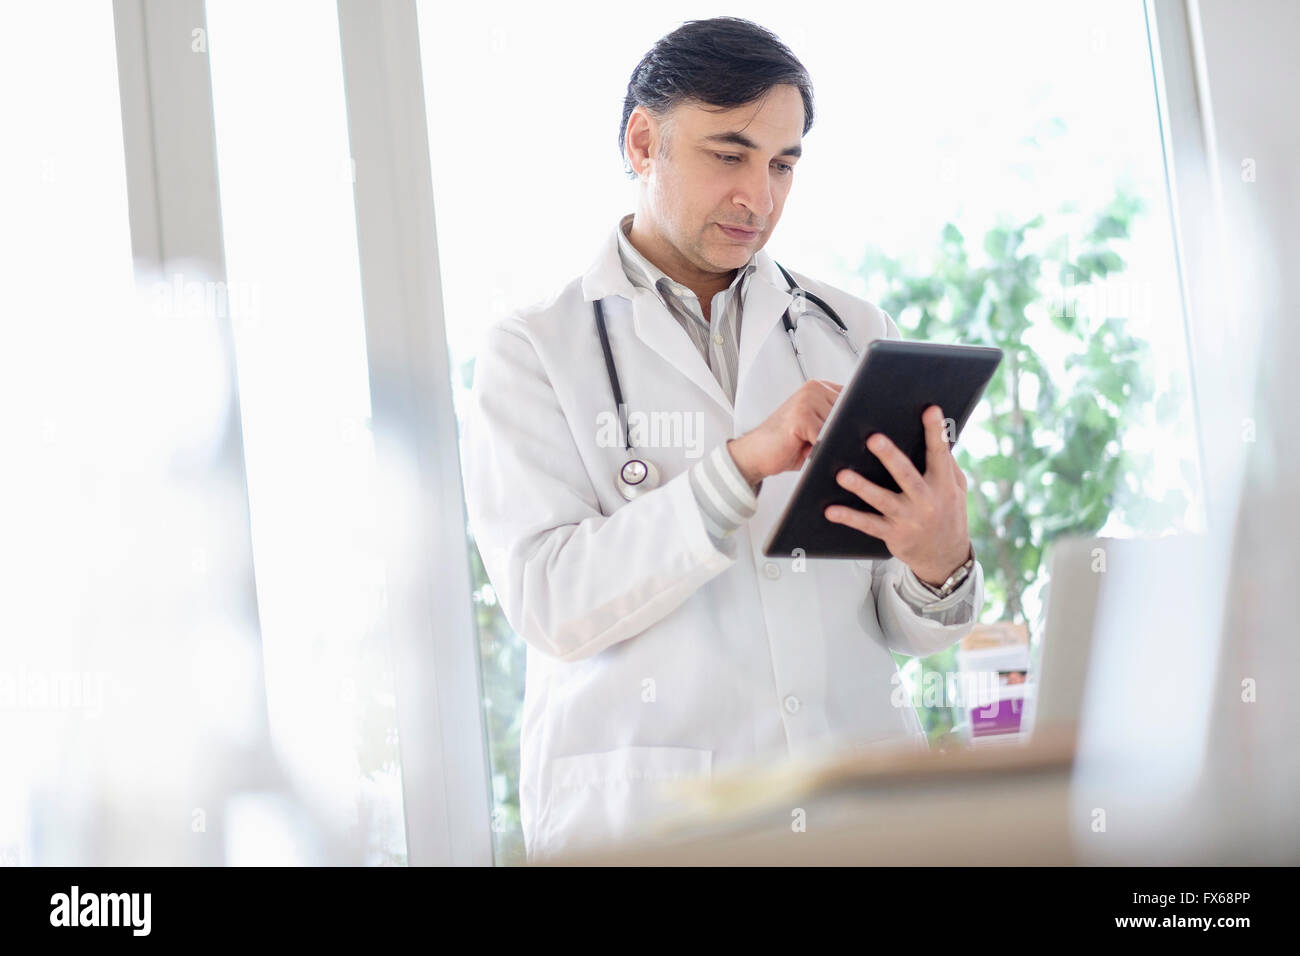 Mixed race doctor using digital tablet Stock Photo